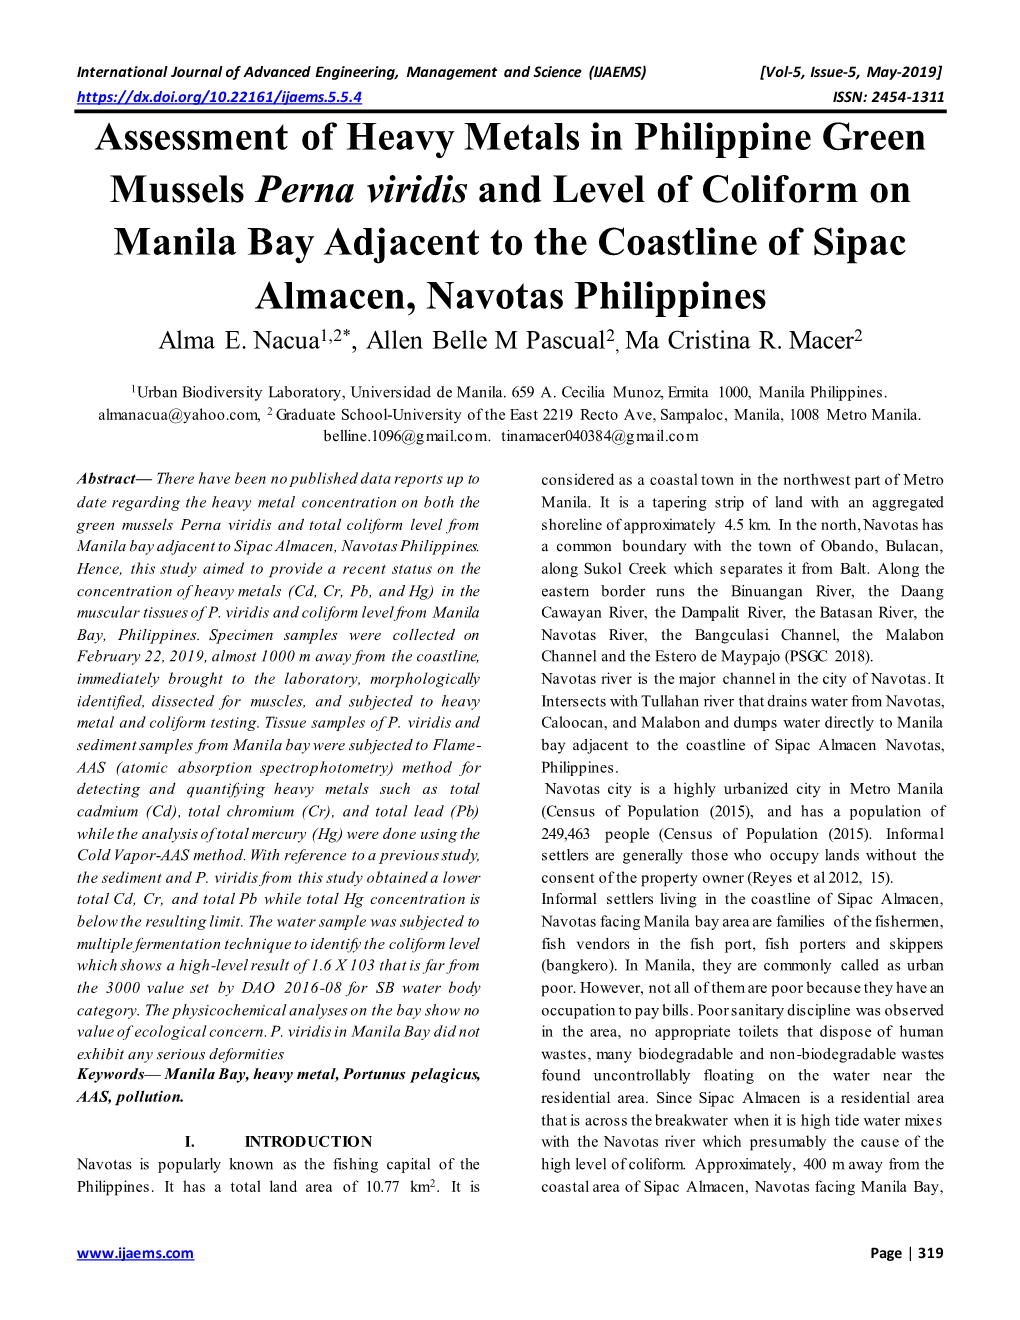 Assessment of Heavy Metals in Philippine Green Mussels Perna